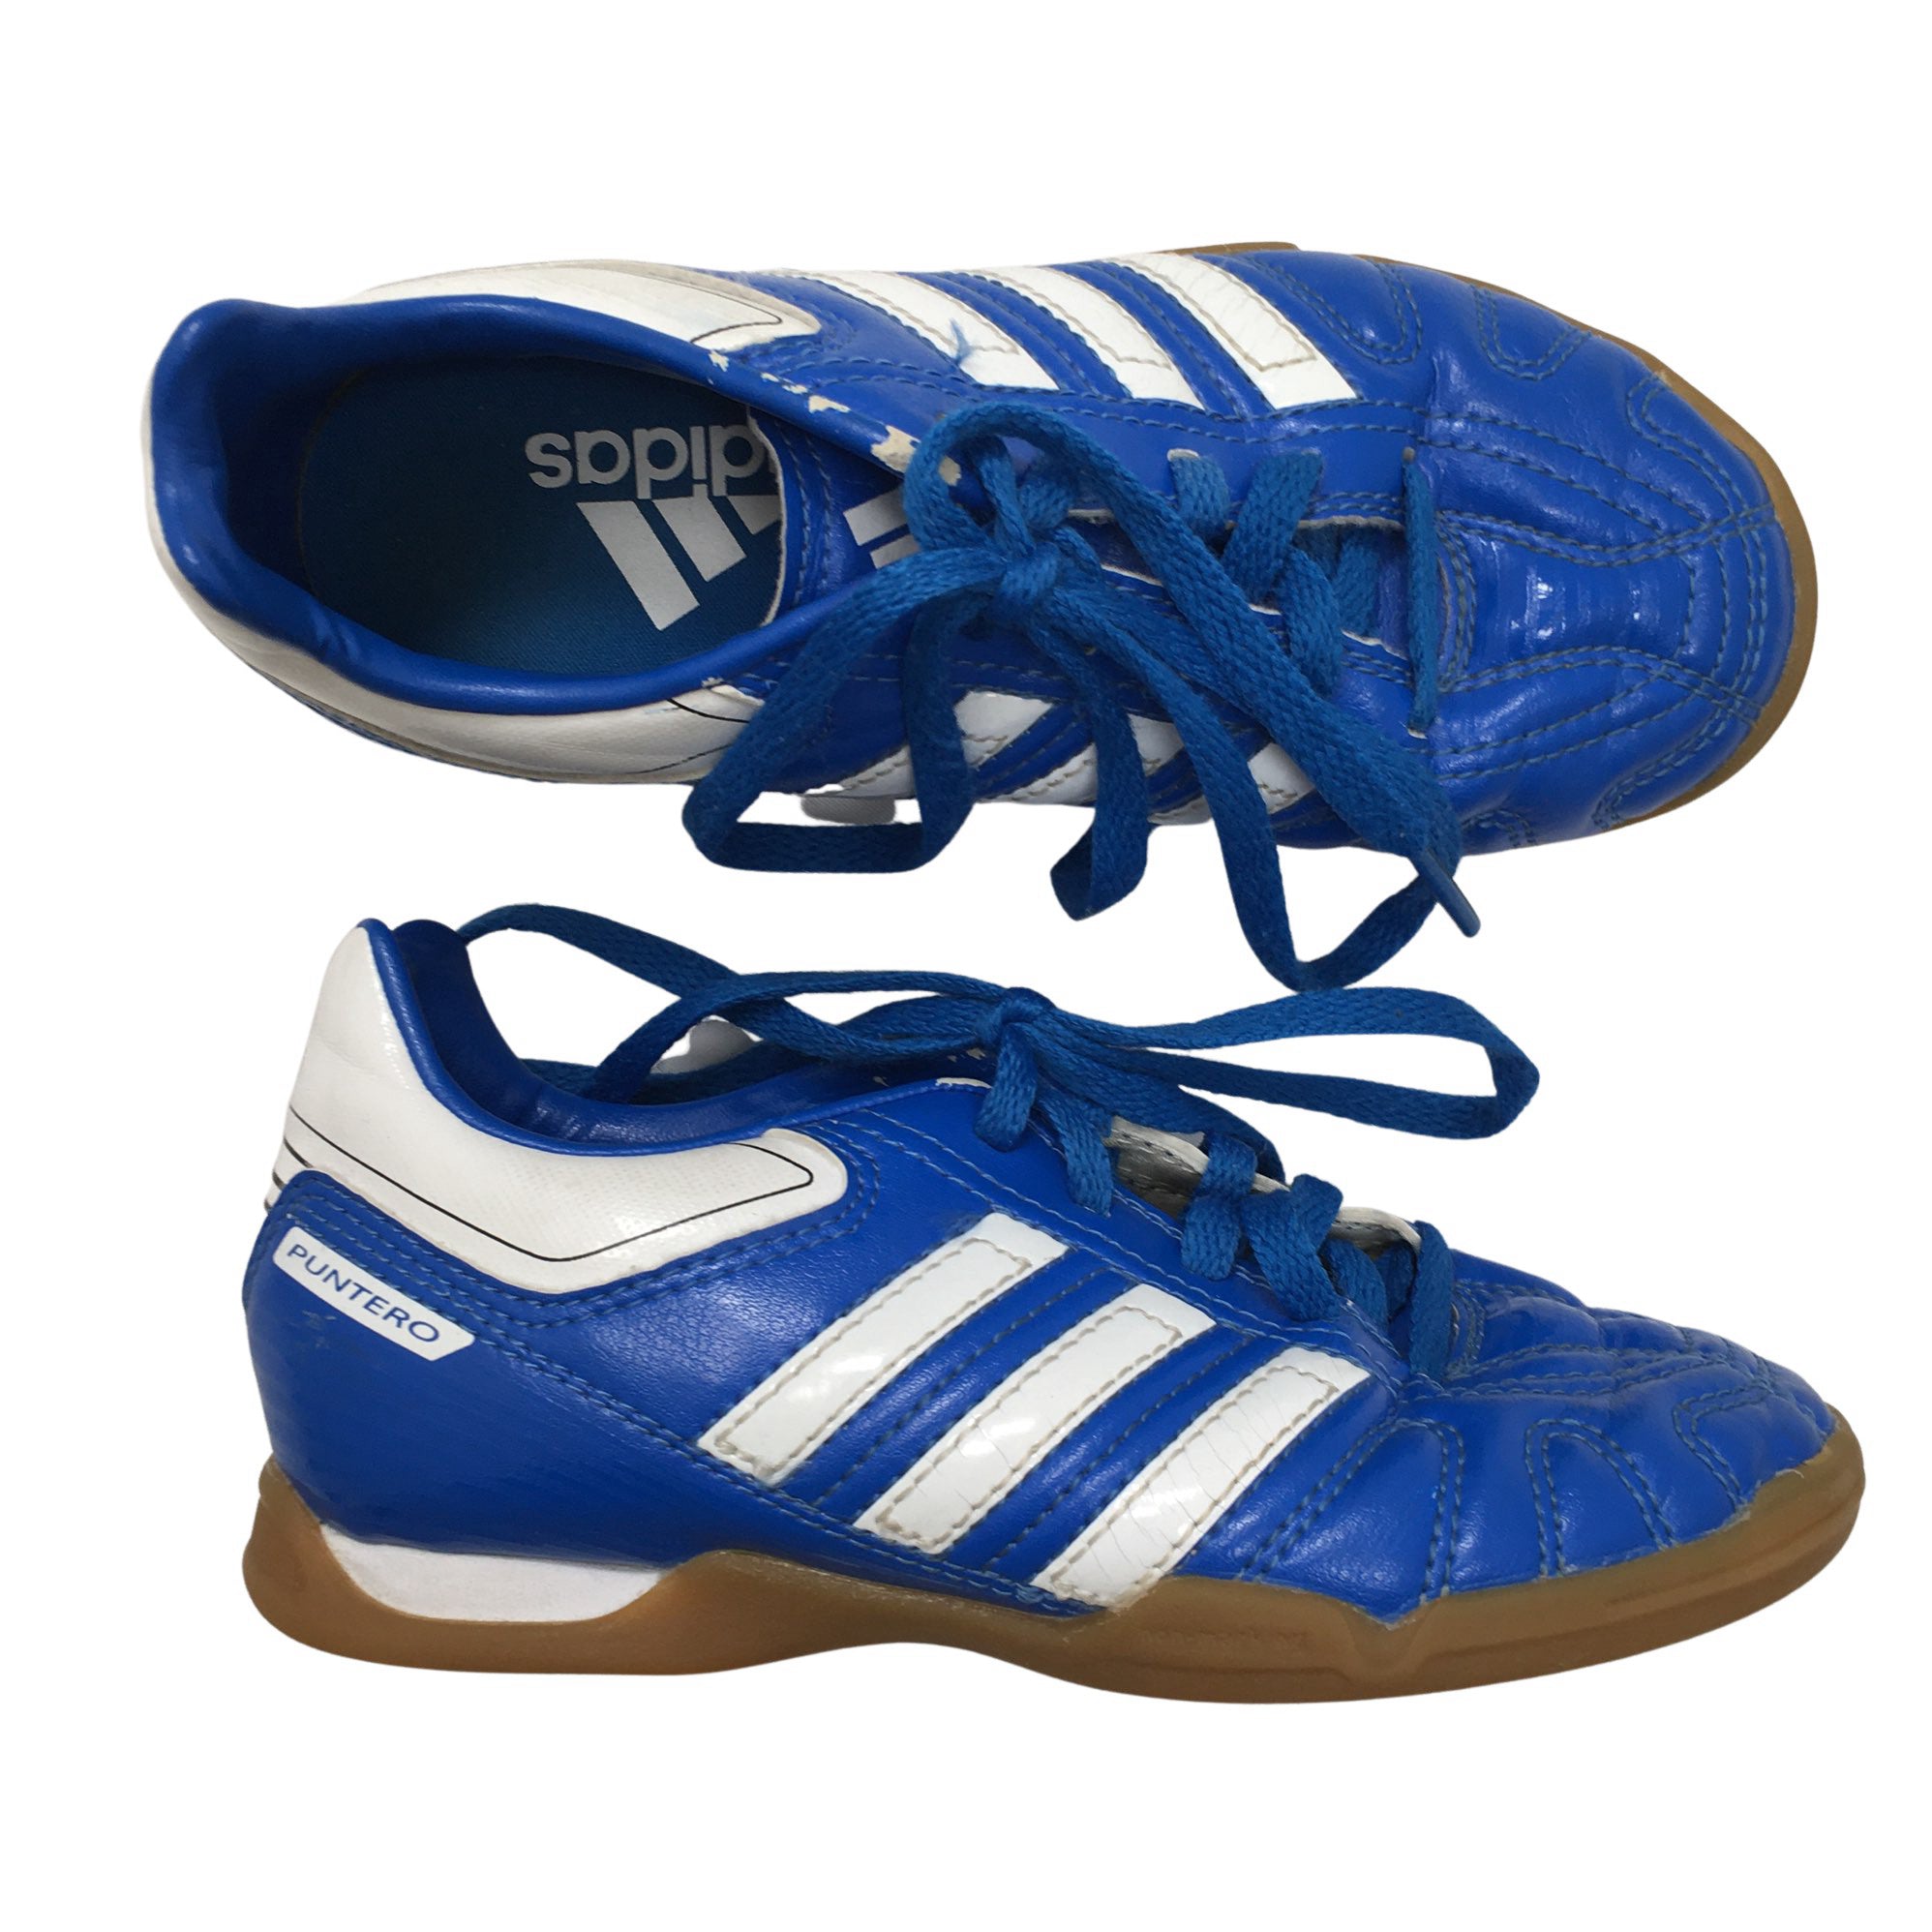 Adidas Indoor sports shoes – Size 31 